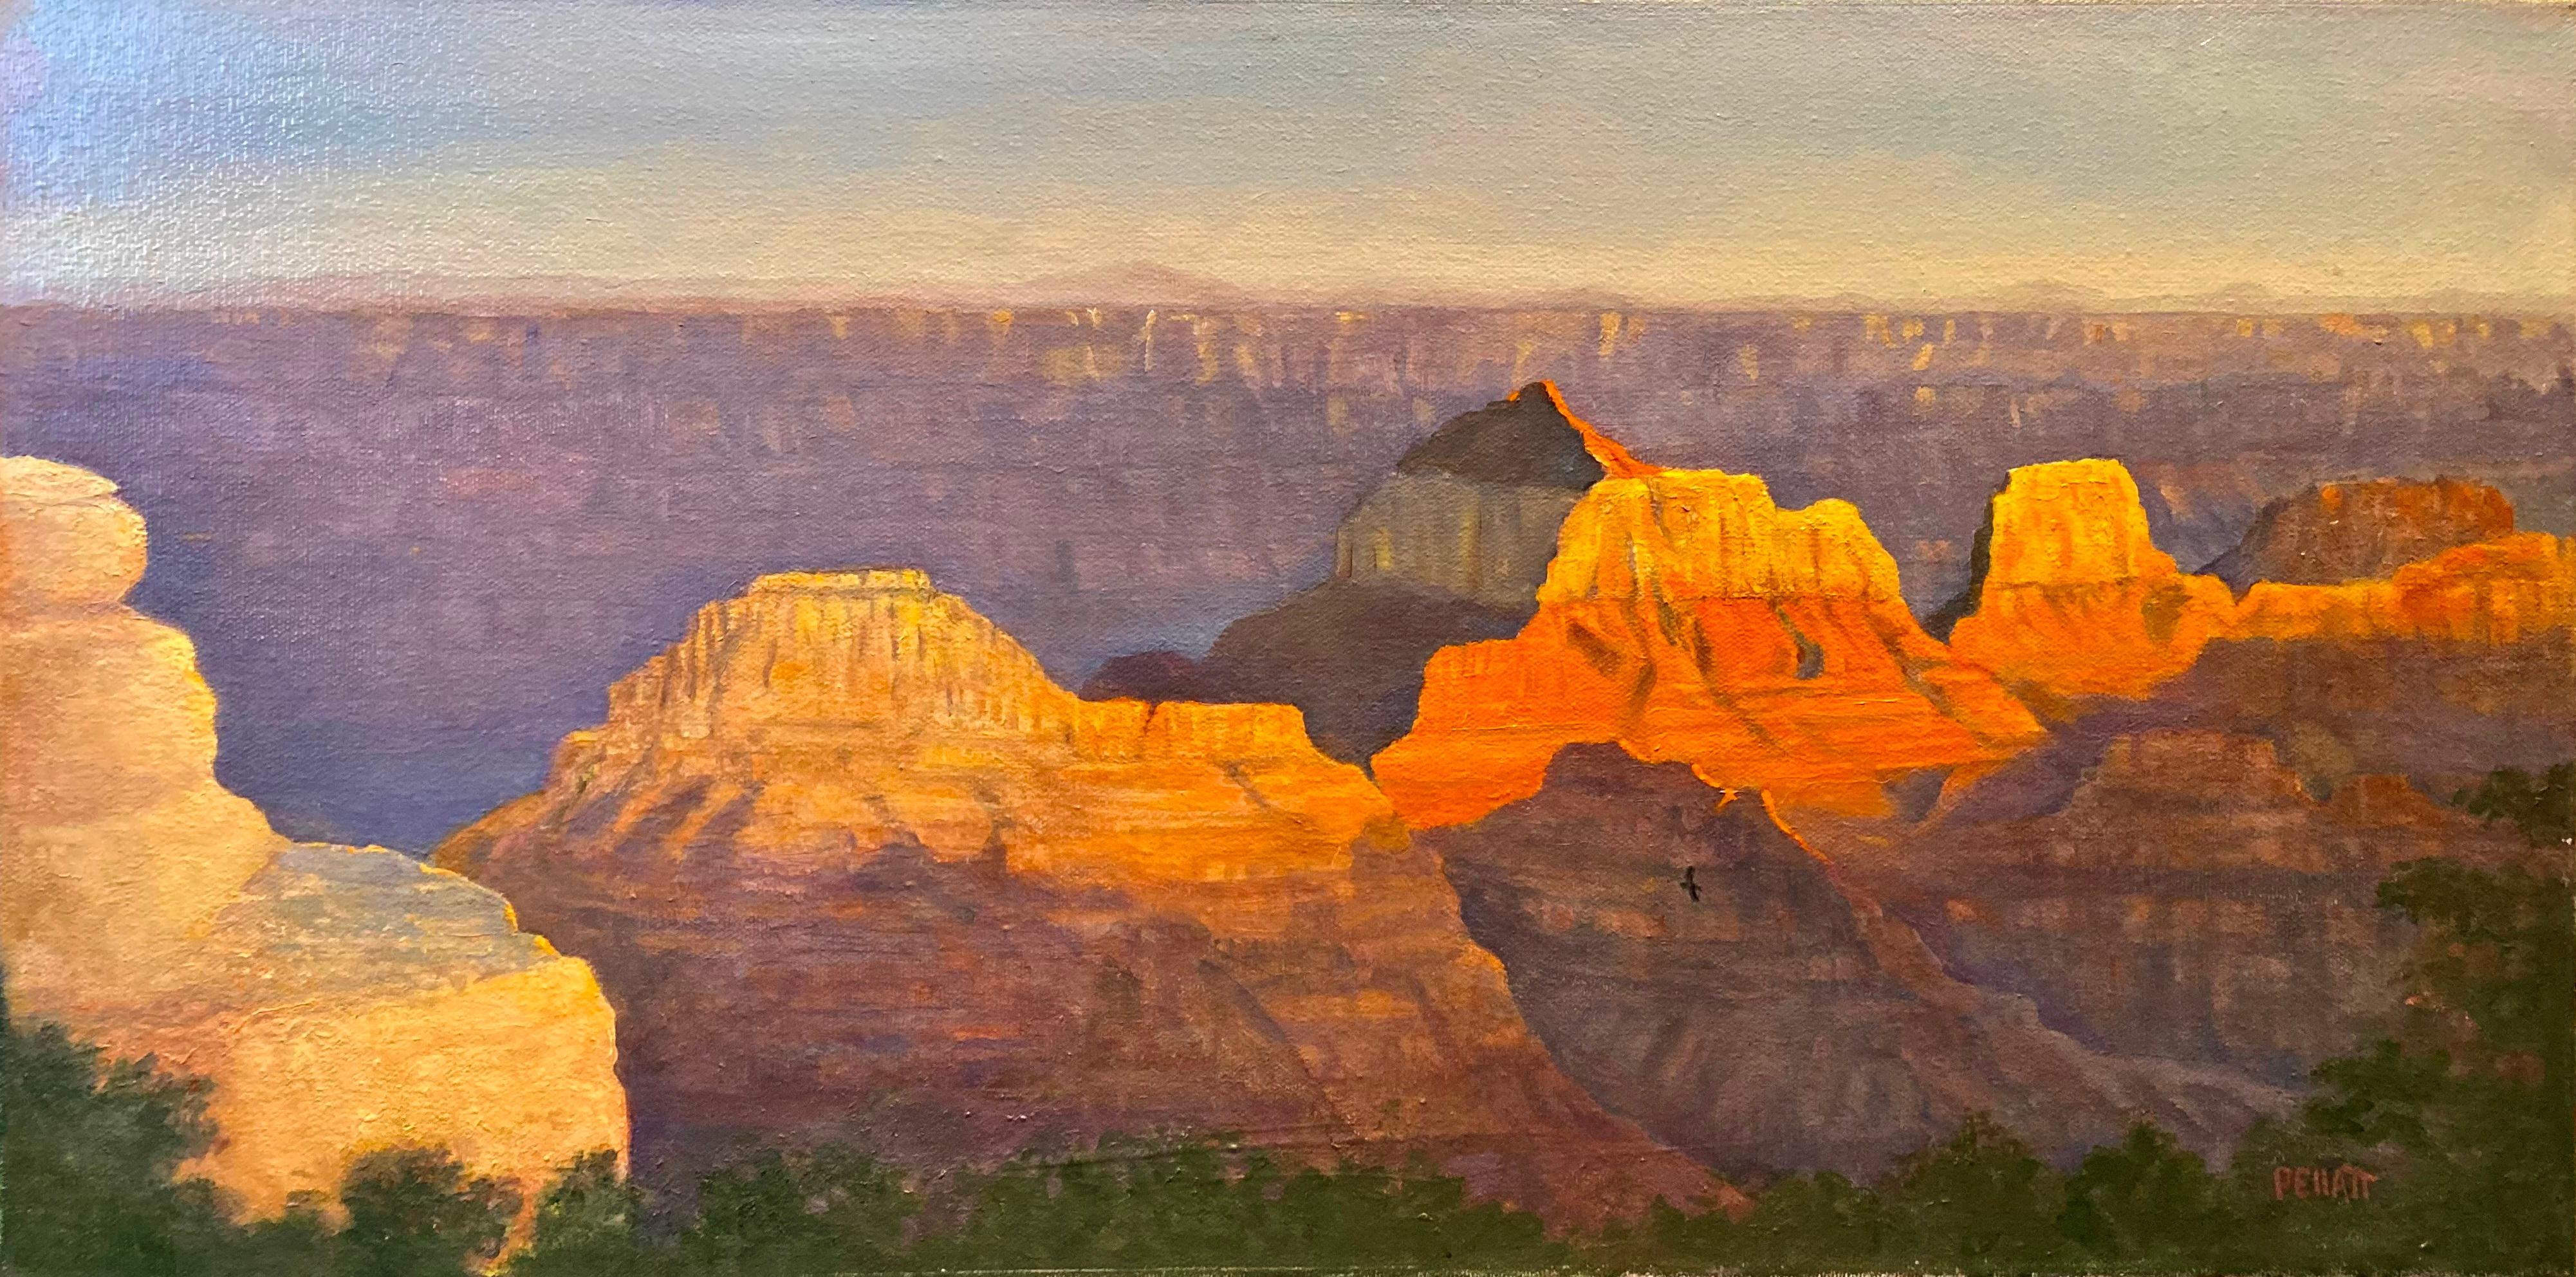 Nancy Pellatt Landscape Painting - Drama of the Sunset at the Brahma Temple in the Grand Canyon is Awe Inspiring